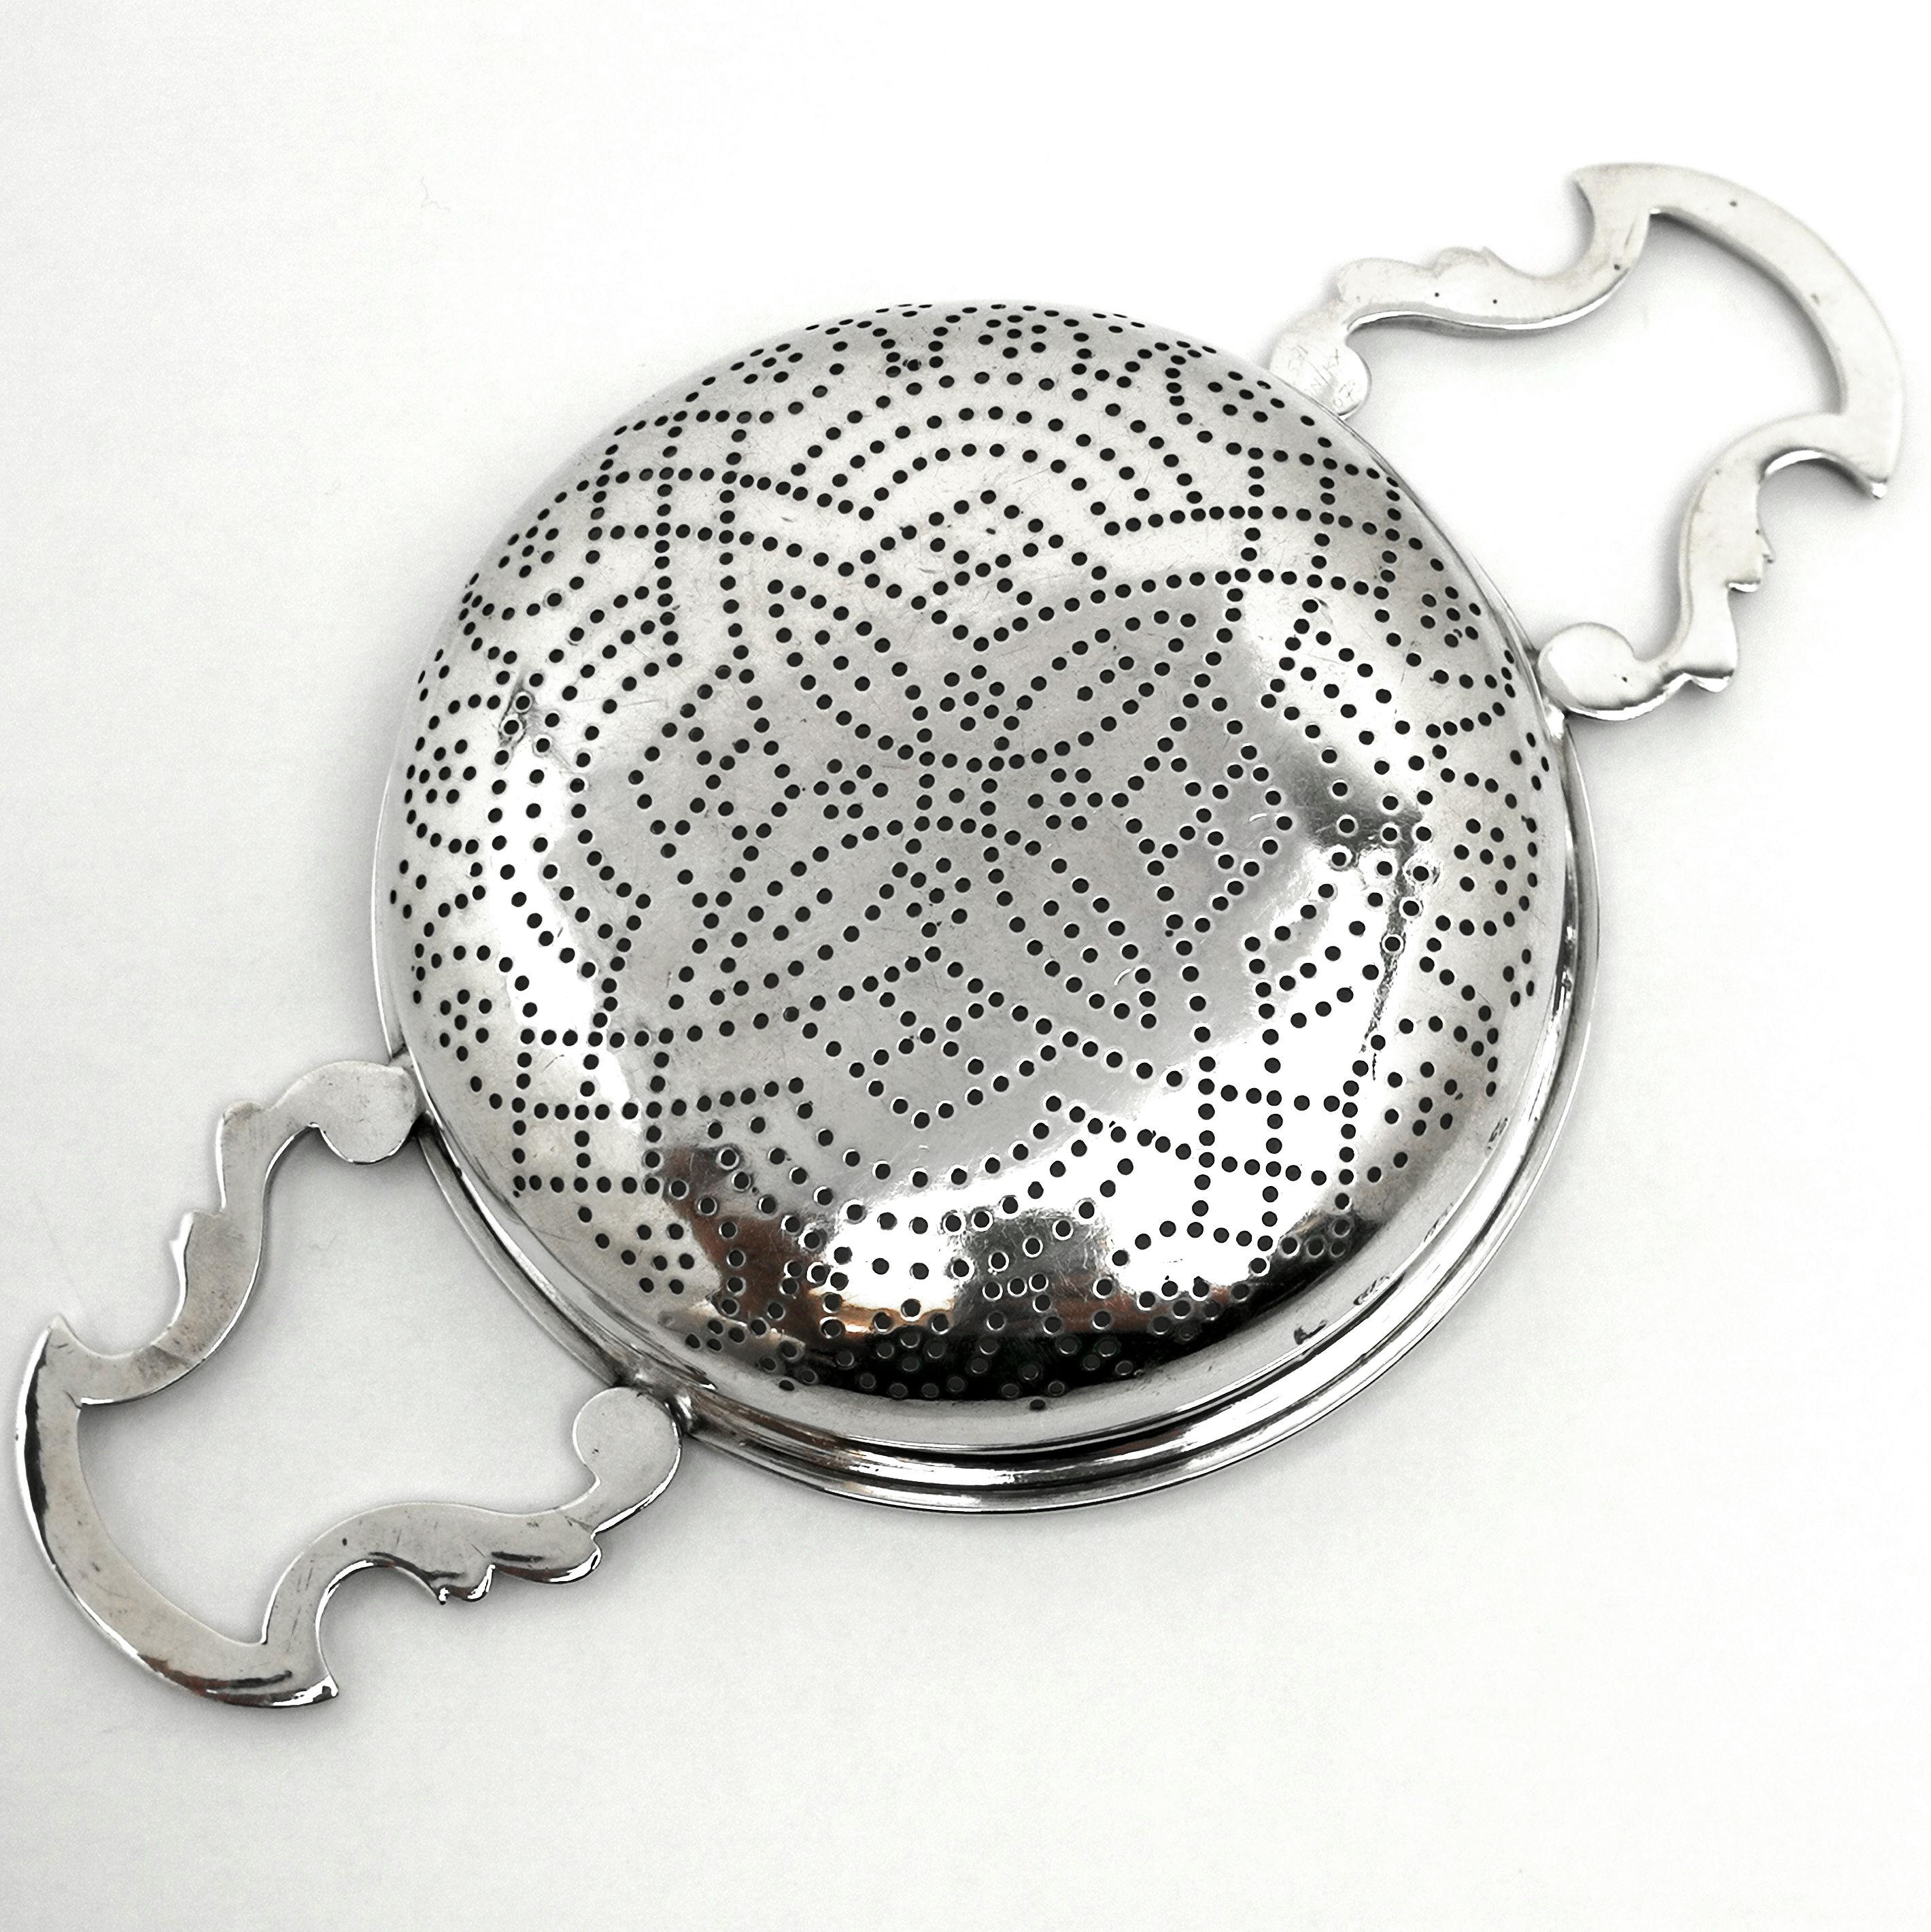 A classic George II Antique solid silver Strainer with a pair of impressive handles and a lovely pierced pattern on the base. 
 
 Made in 1756 by William Bond.
 
 Approx. Length incl Handles - 18.3cm
 Approx. Diameter - 10.3cm
 
This Georgian